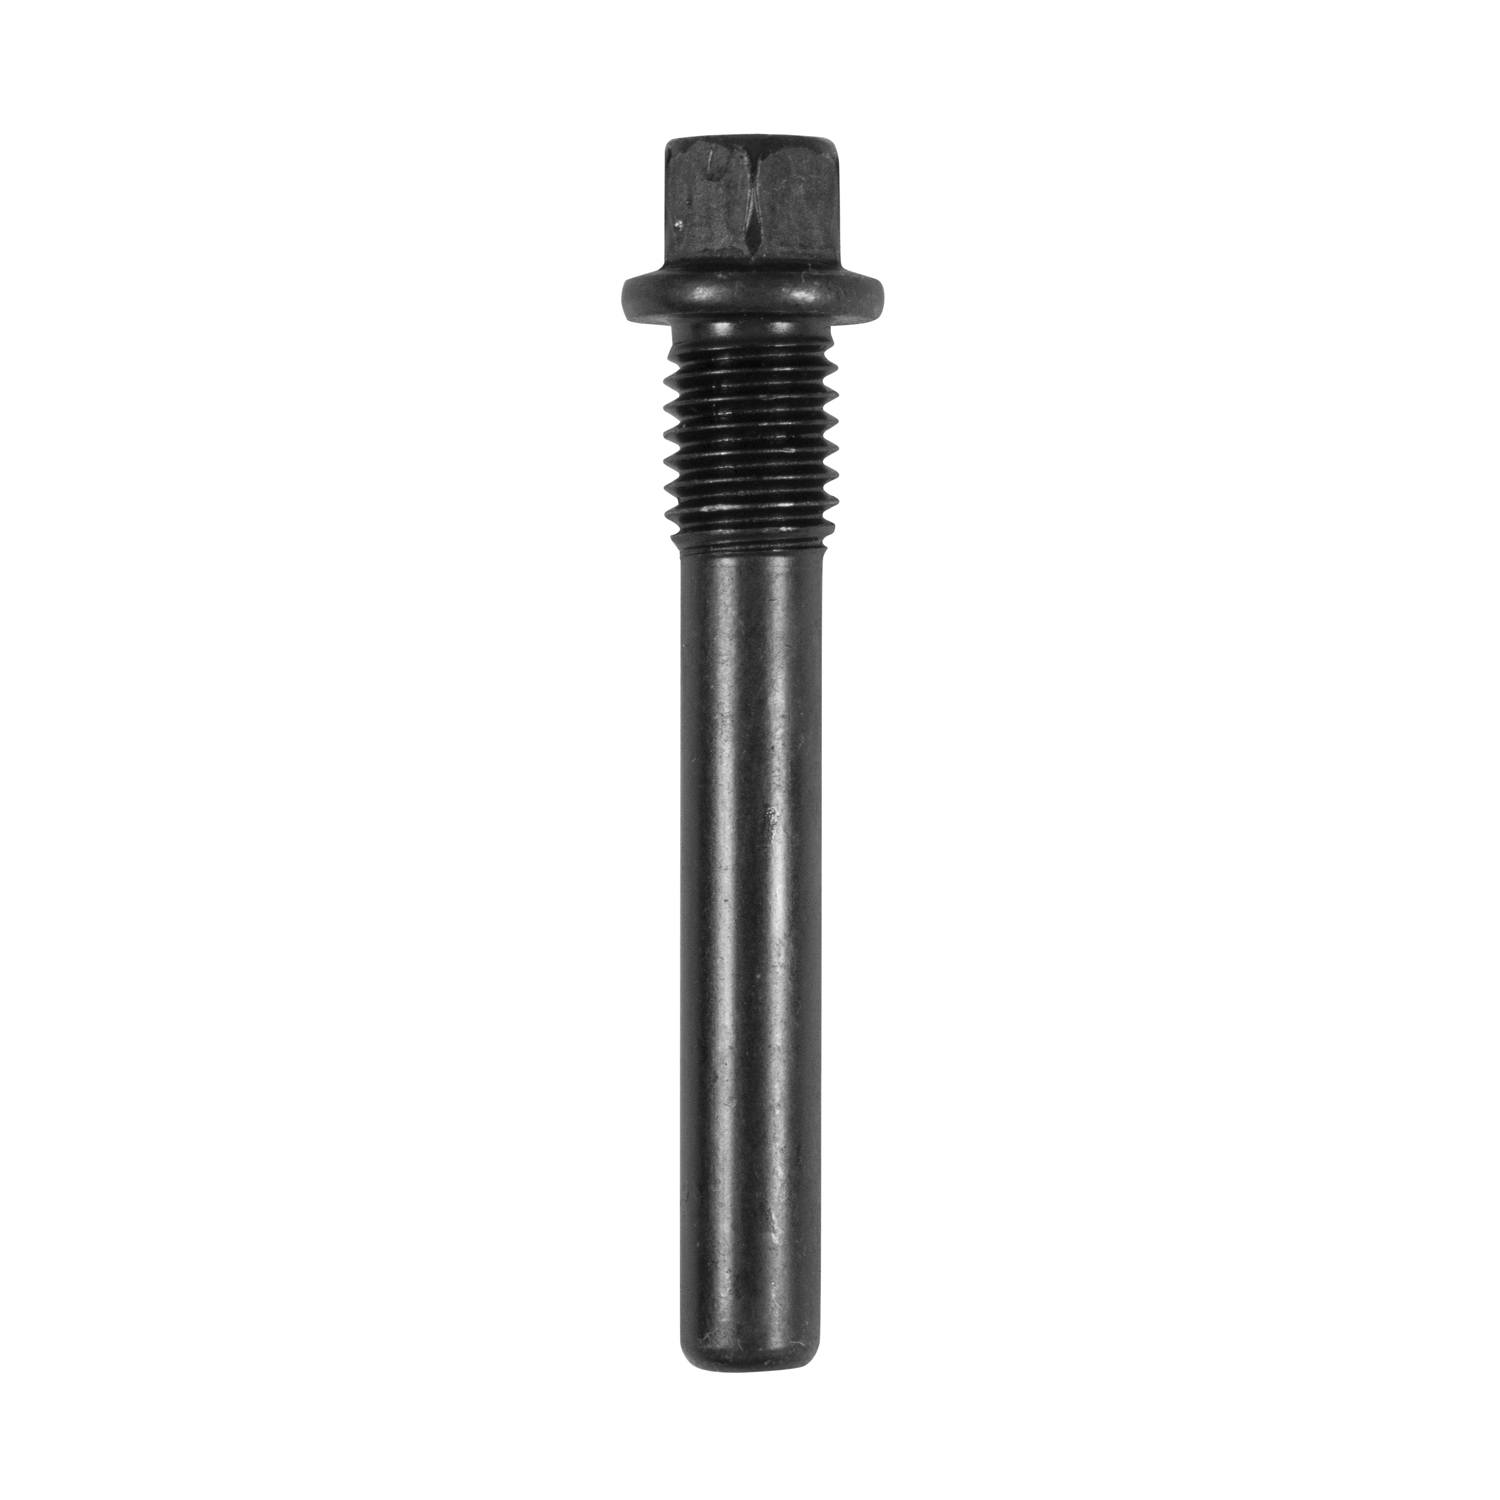 Standard Open and Gov-Loc cross pin bolt, M10x1.5 thread for GM 9.5"/9.25" IFS 